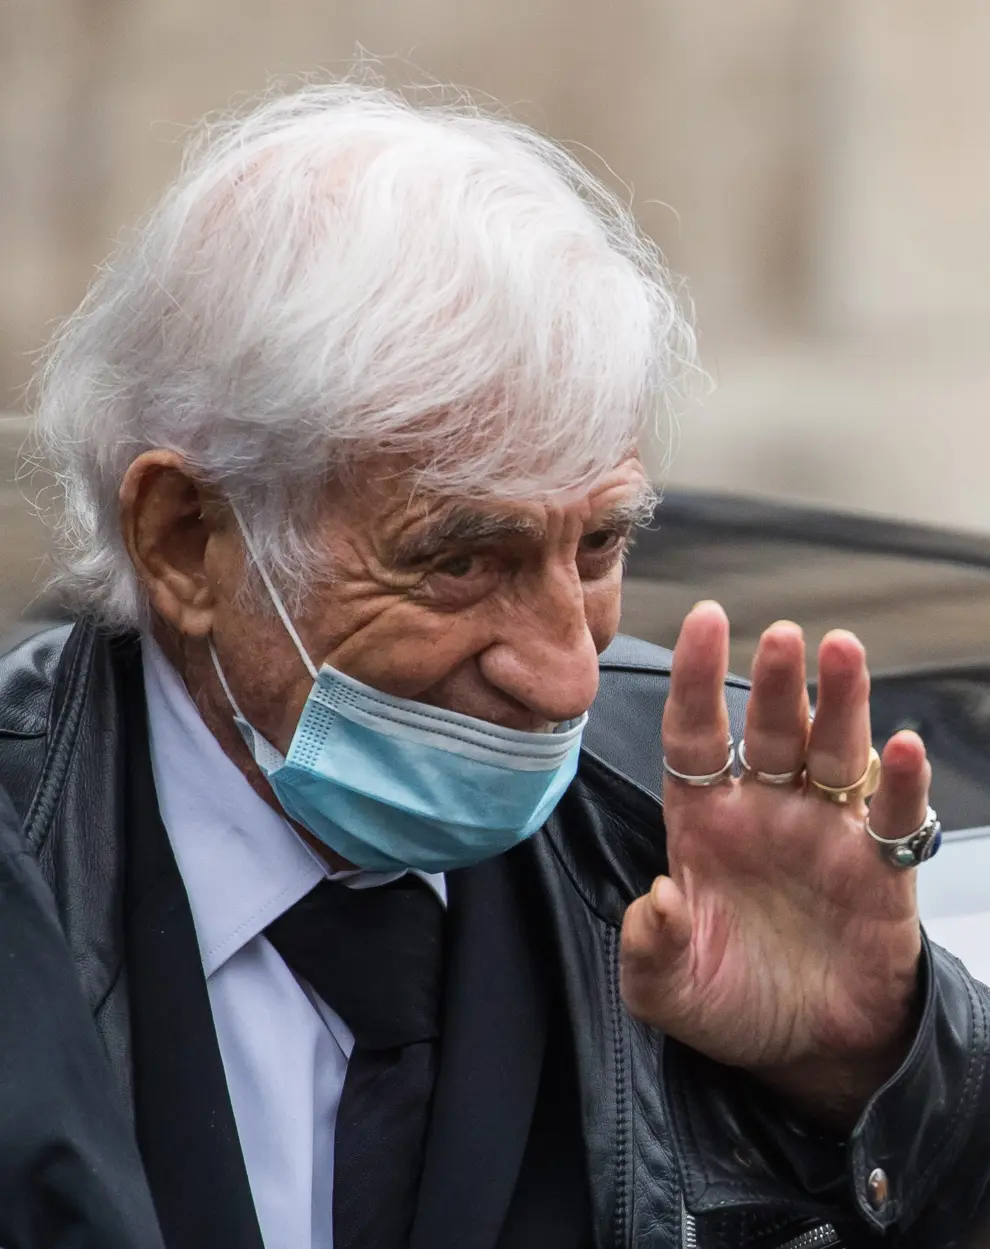 Paris (France), 04/06/2020.- (FILE) - French actor Jean-Paul Belmondo wears a face mask while waving to the public as he leaves the funeral ceremony for Guy Bedos at the Church of Saint-Germain-des-Pres in Paris, France, 04 June 2020 (reissued 06 September 2021). French actor Jean-Paul Belmondo has died aged 88 on 06 September 2021. (Francia) EFE/EPA/CHRISTOPHE PETIT TESSON (FILE) FRANCE JEAN PAUL BELMONDO OBIT